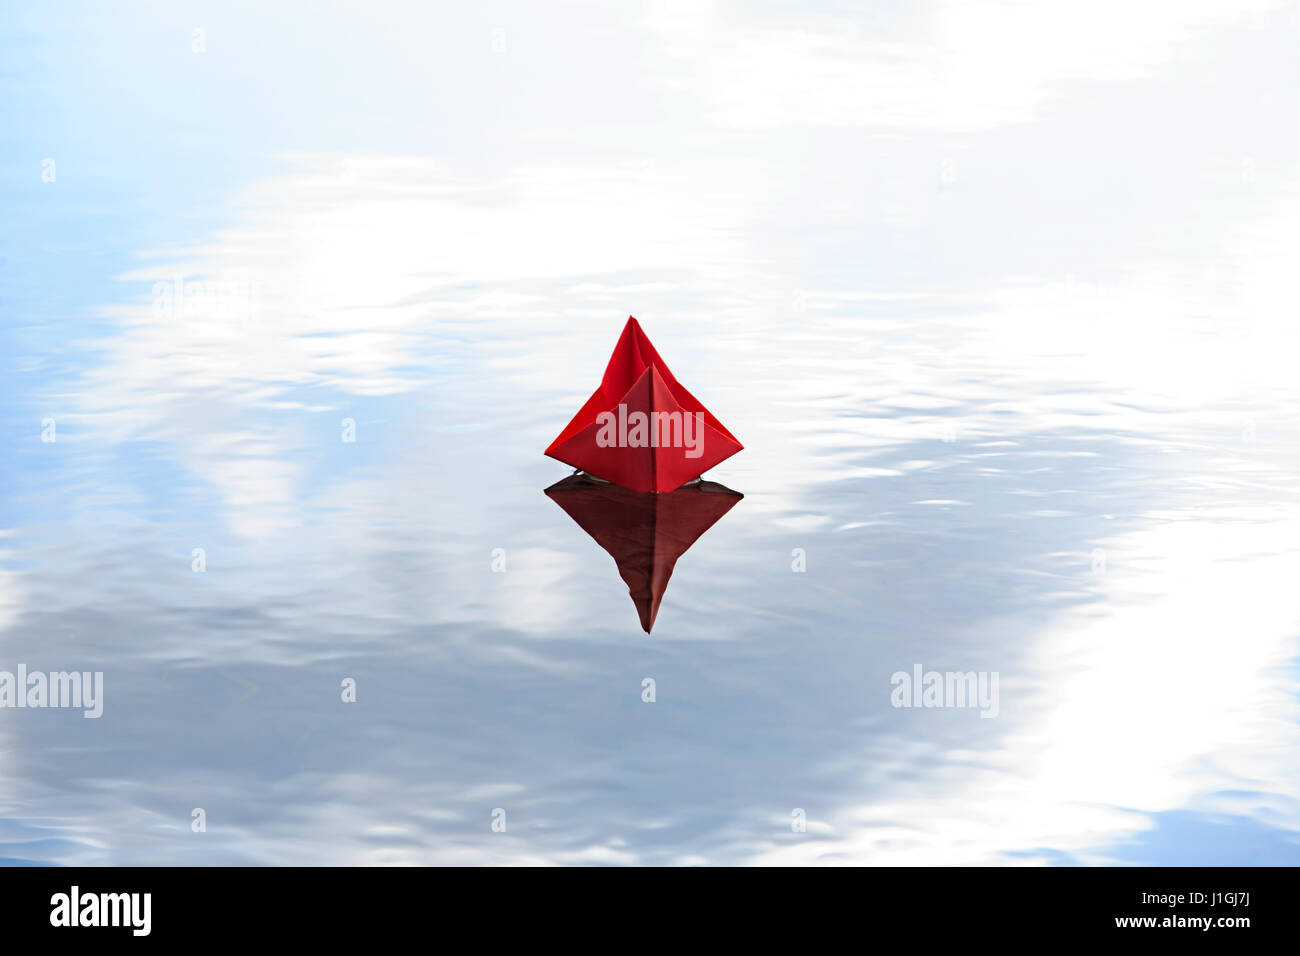 Red paper boat on blue water with free space for text Stock Photo